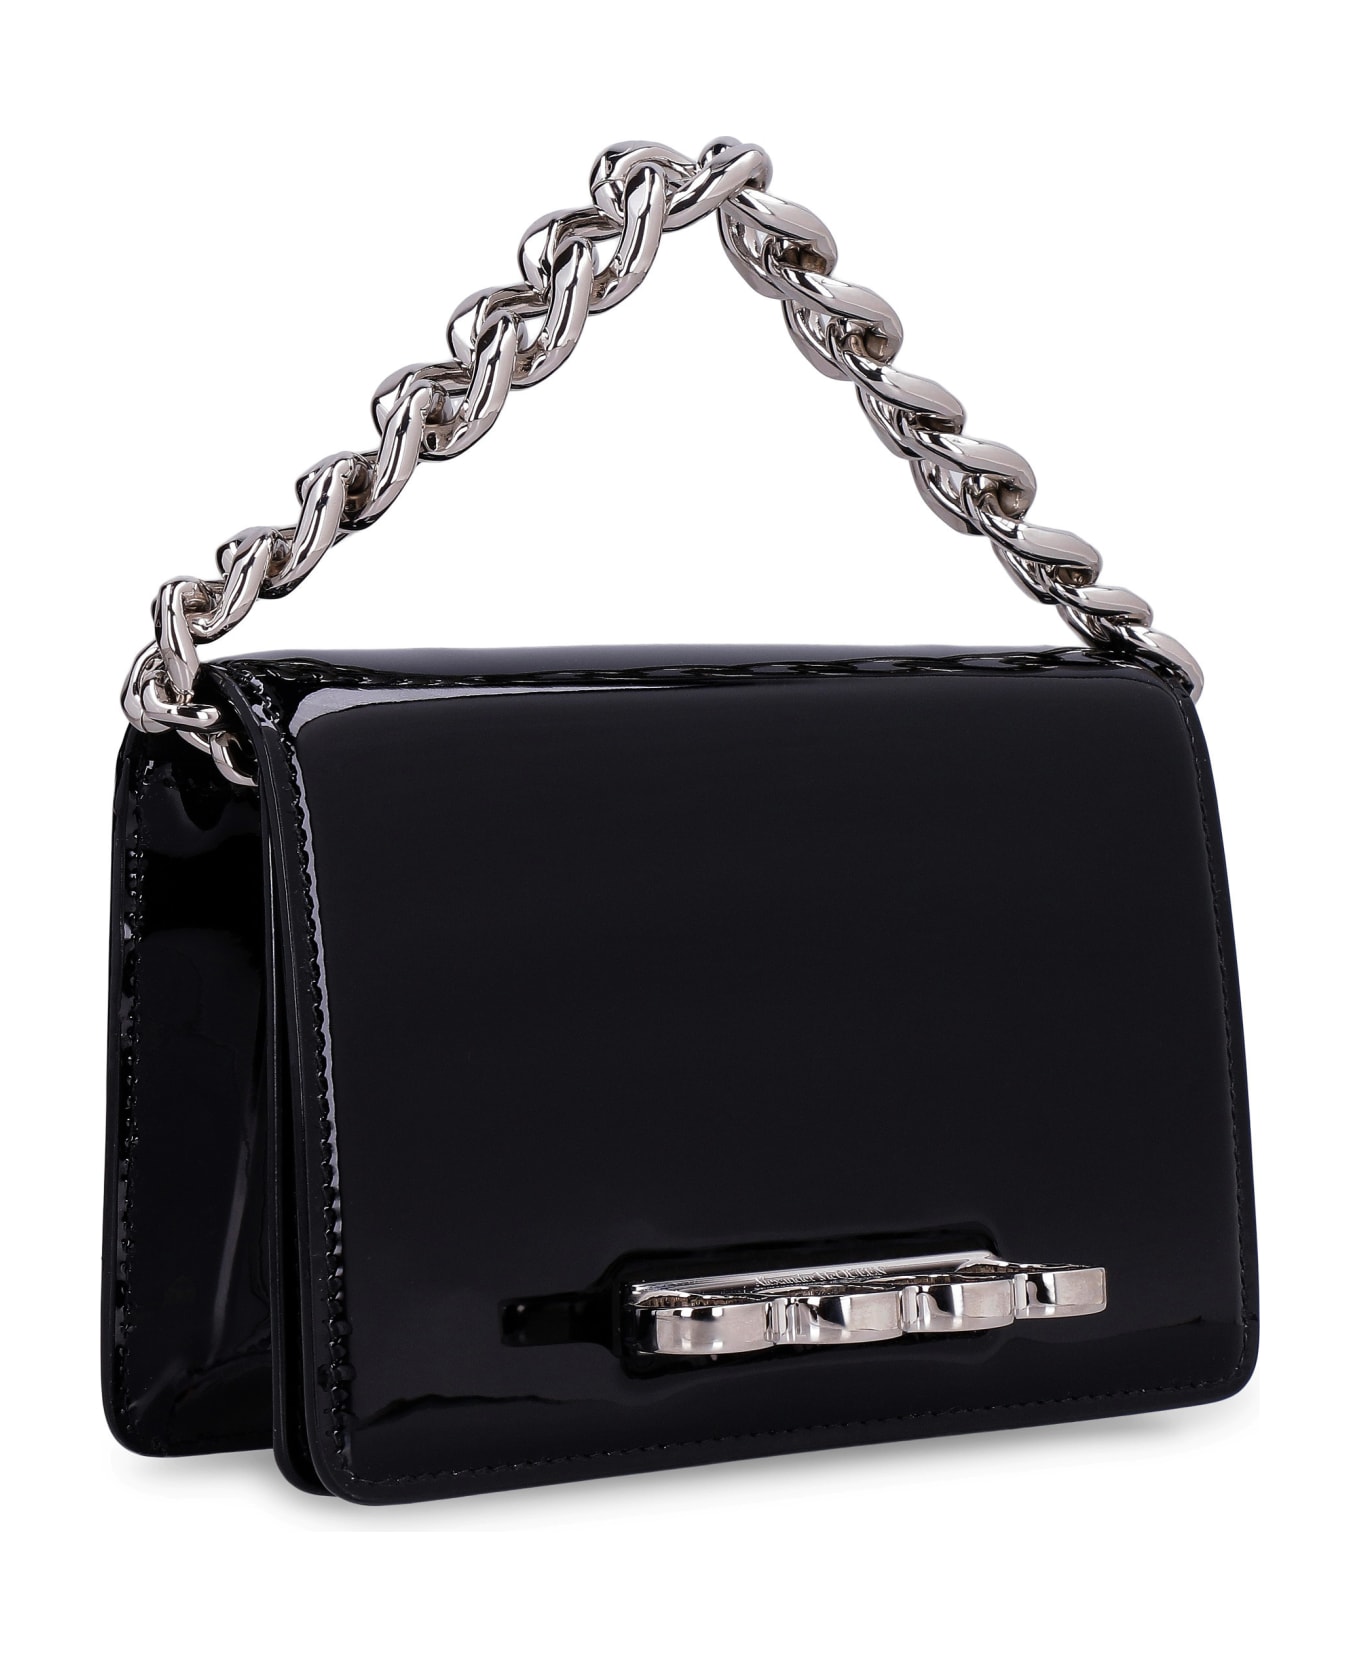 Alexander McQueen The Four Ring Mini Patent Leather Bag - Black